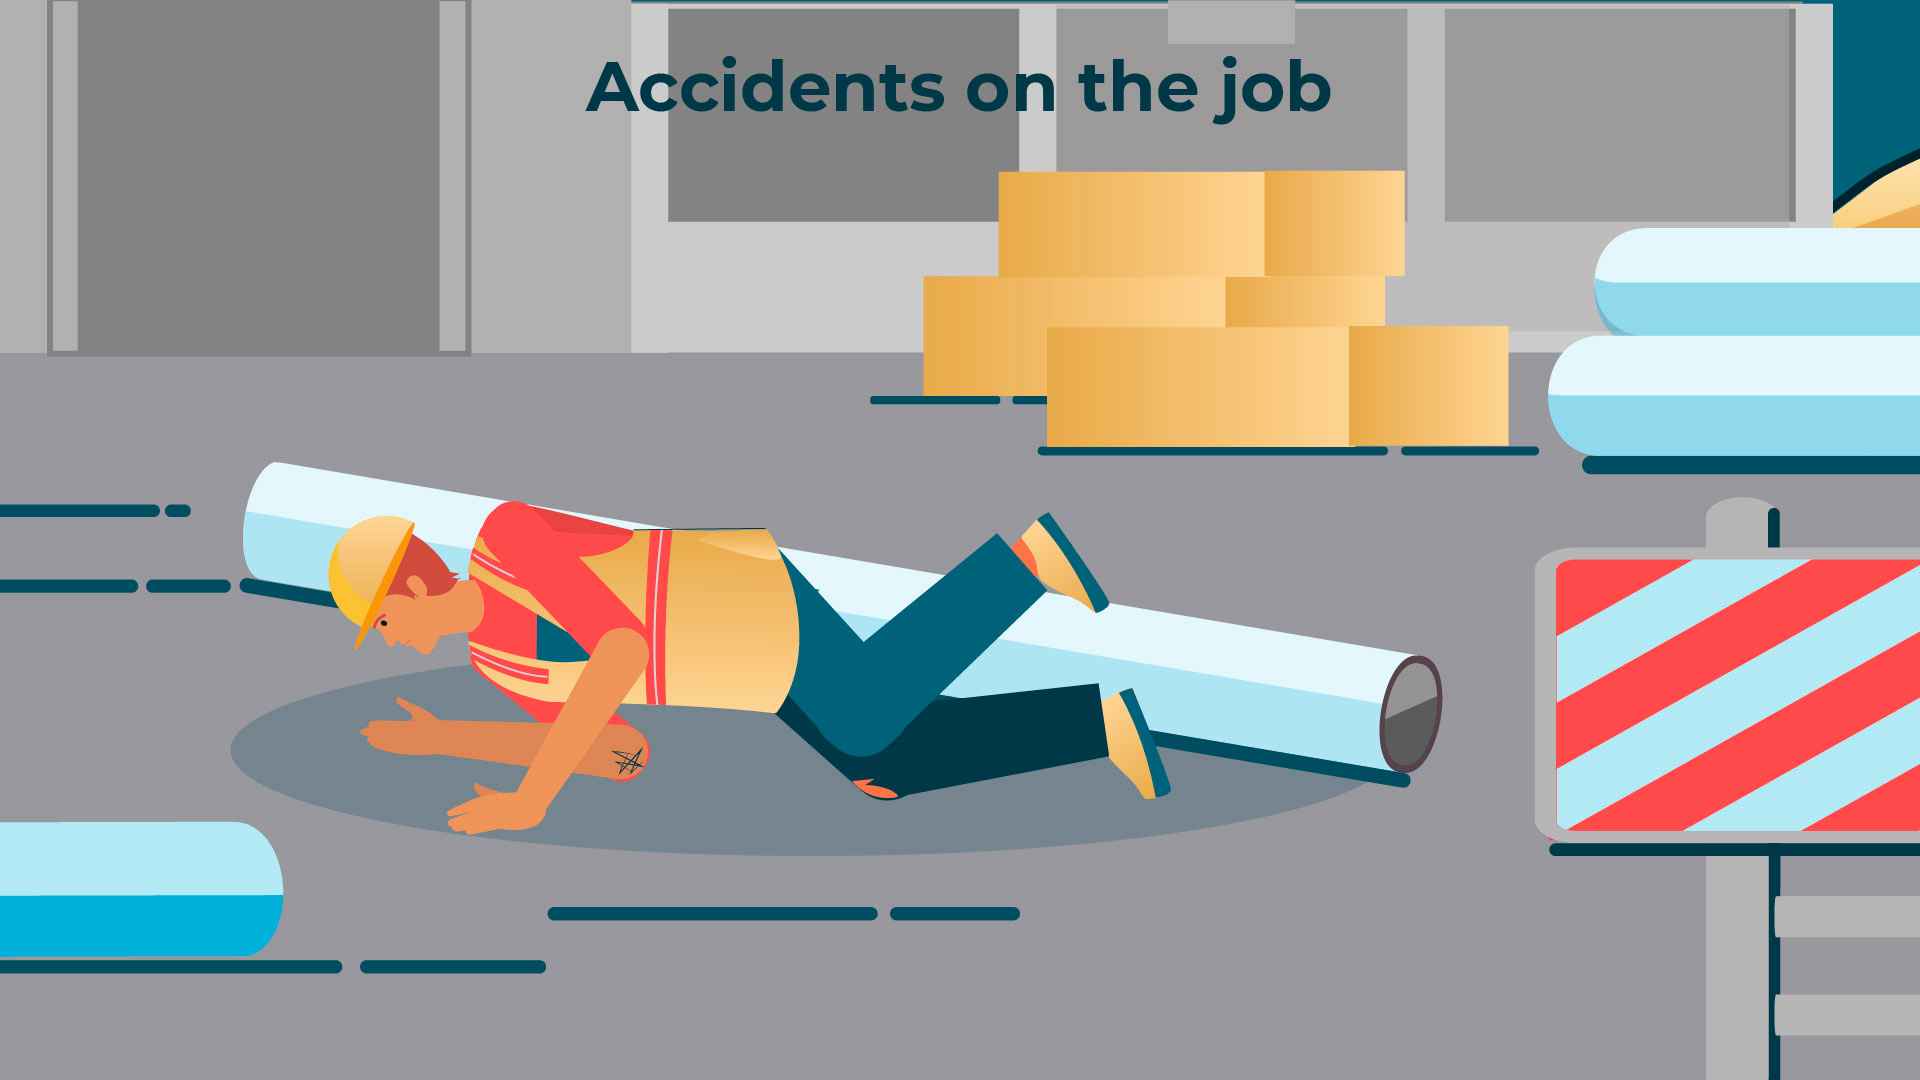 Accidents on the job - Character Animation